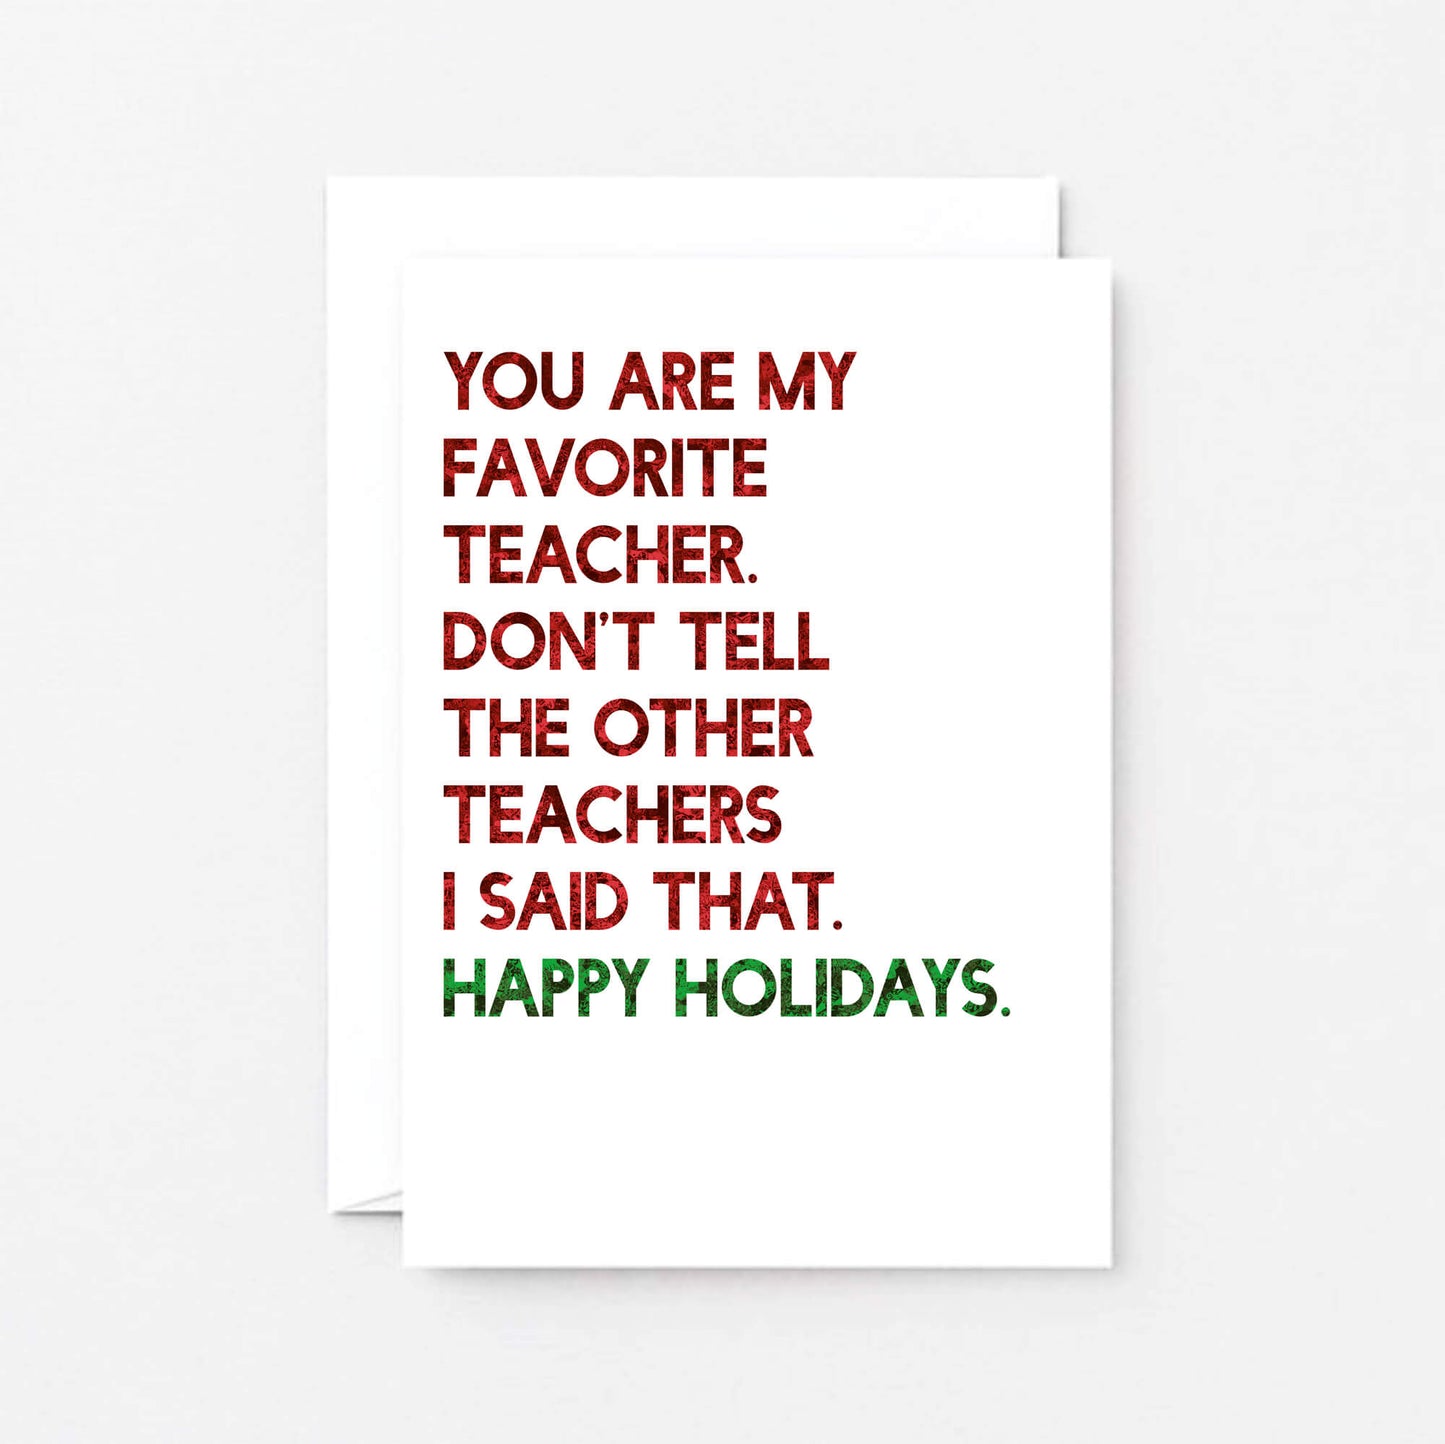 Teacher Holiday Card by SixElevenCreations. Reads You are my favorite teacher. Don't tell the other teachers I said that. Happy holidays. Product Code SEC0054A6_US